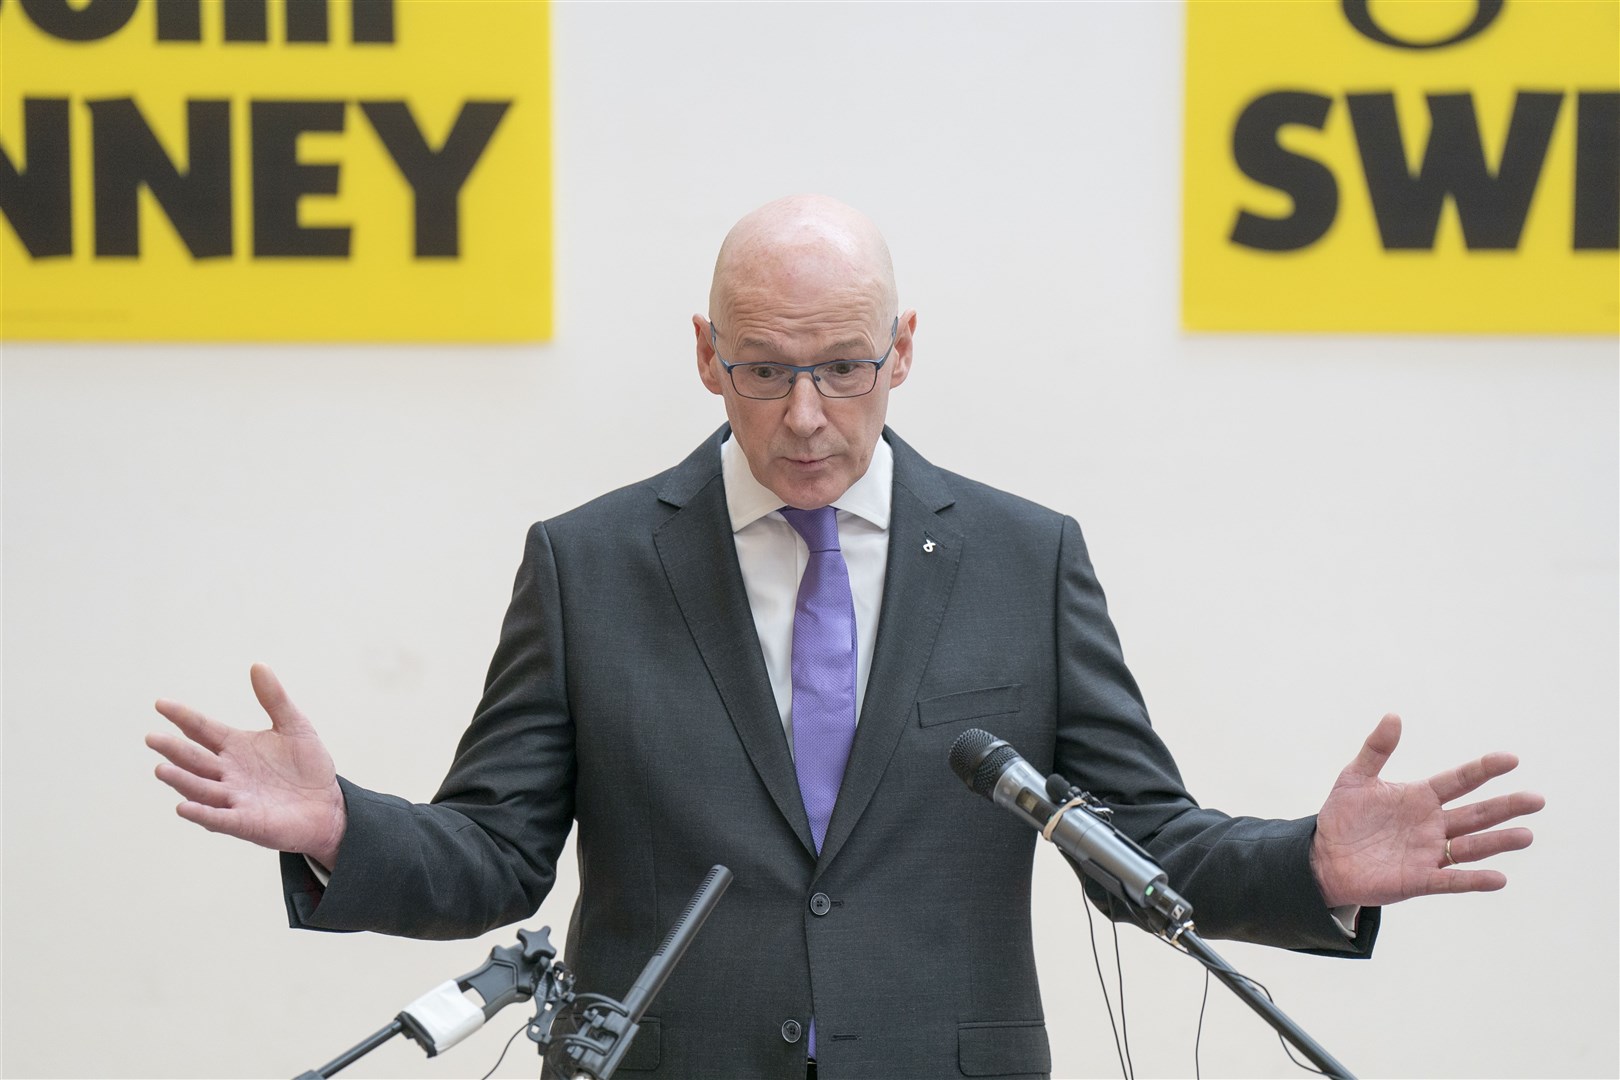 John Swinney is now expected to become Scotland’s next first minister, after becoming leader of the SNP unopposed on Monday (Jane Barlow/PA)